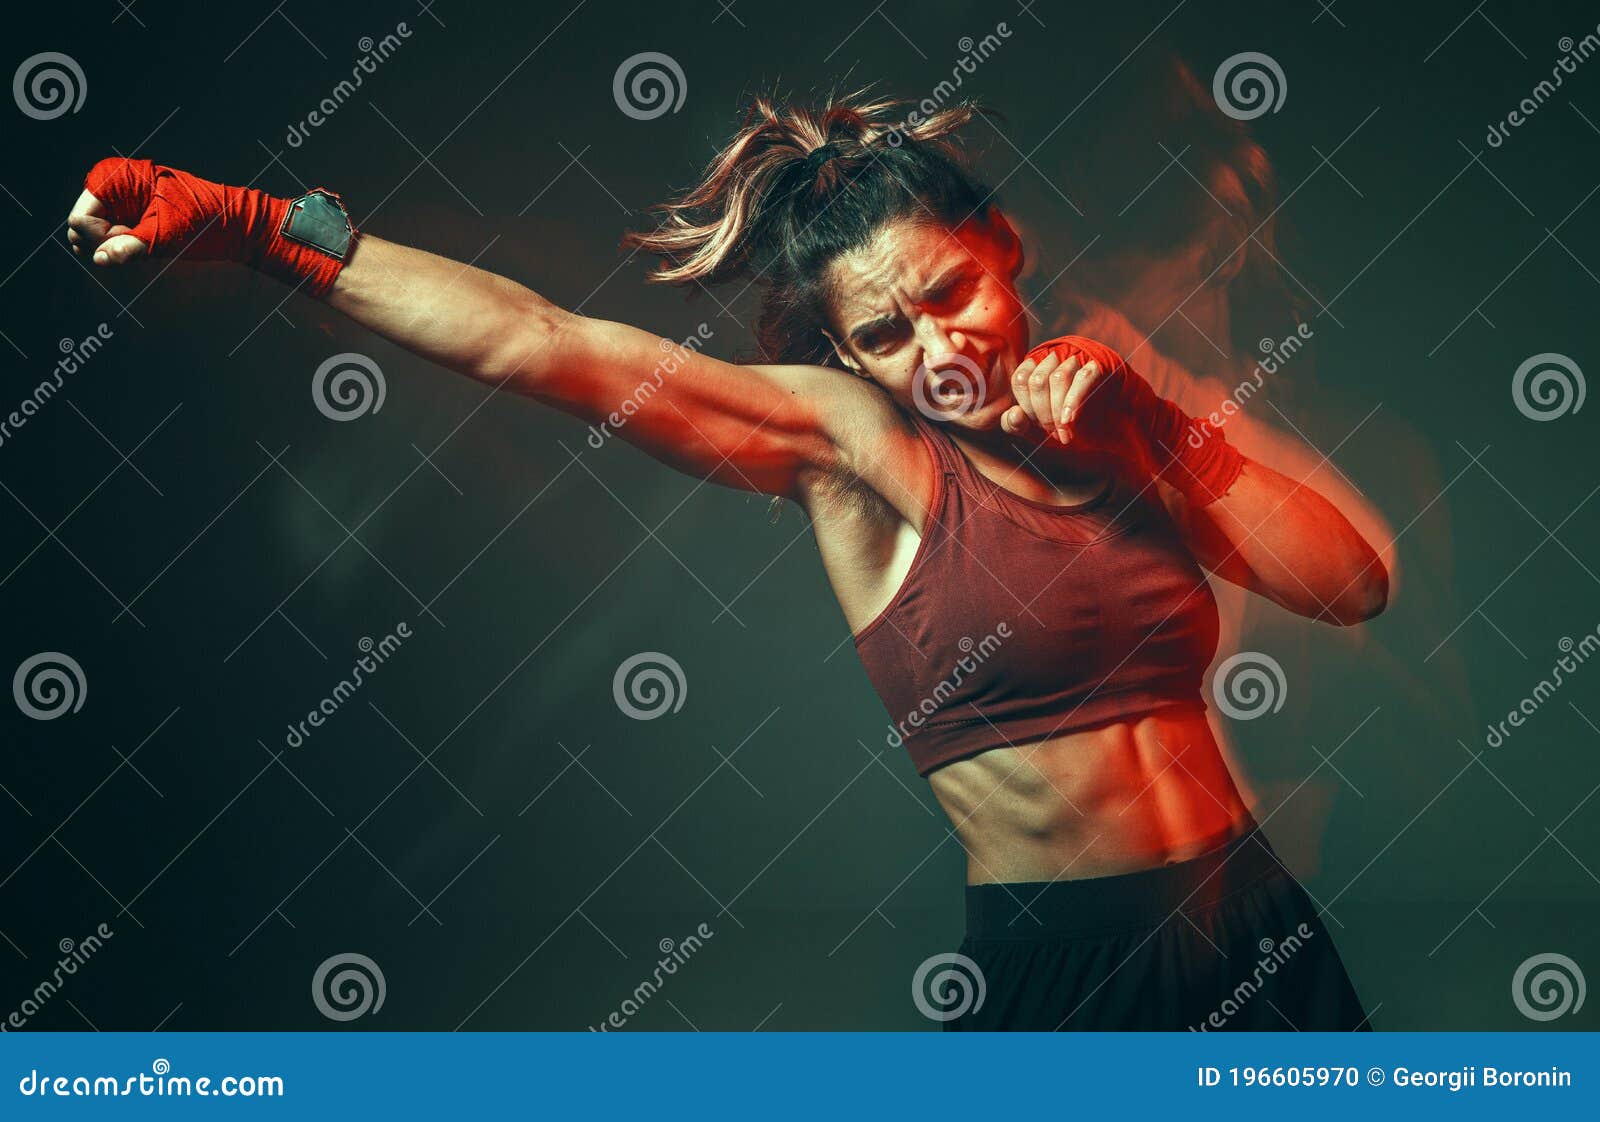 cool girl fighter with relief abs makes jab in studio in neon light. sport and motivation concept. long exposure shot